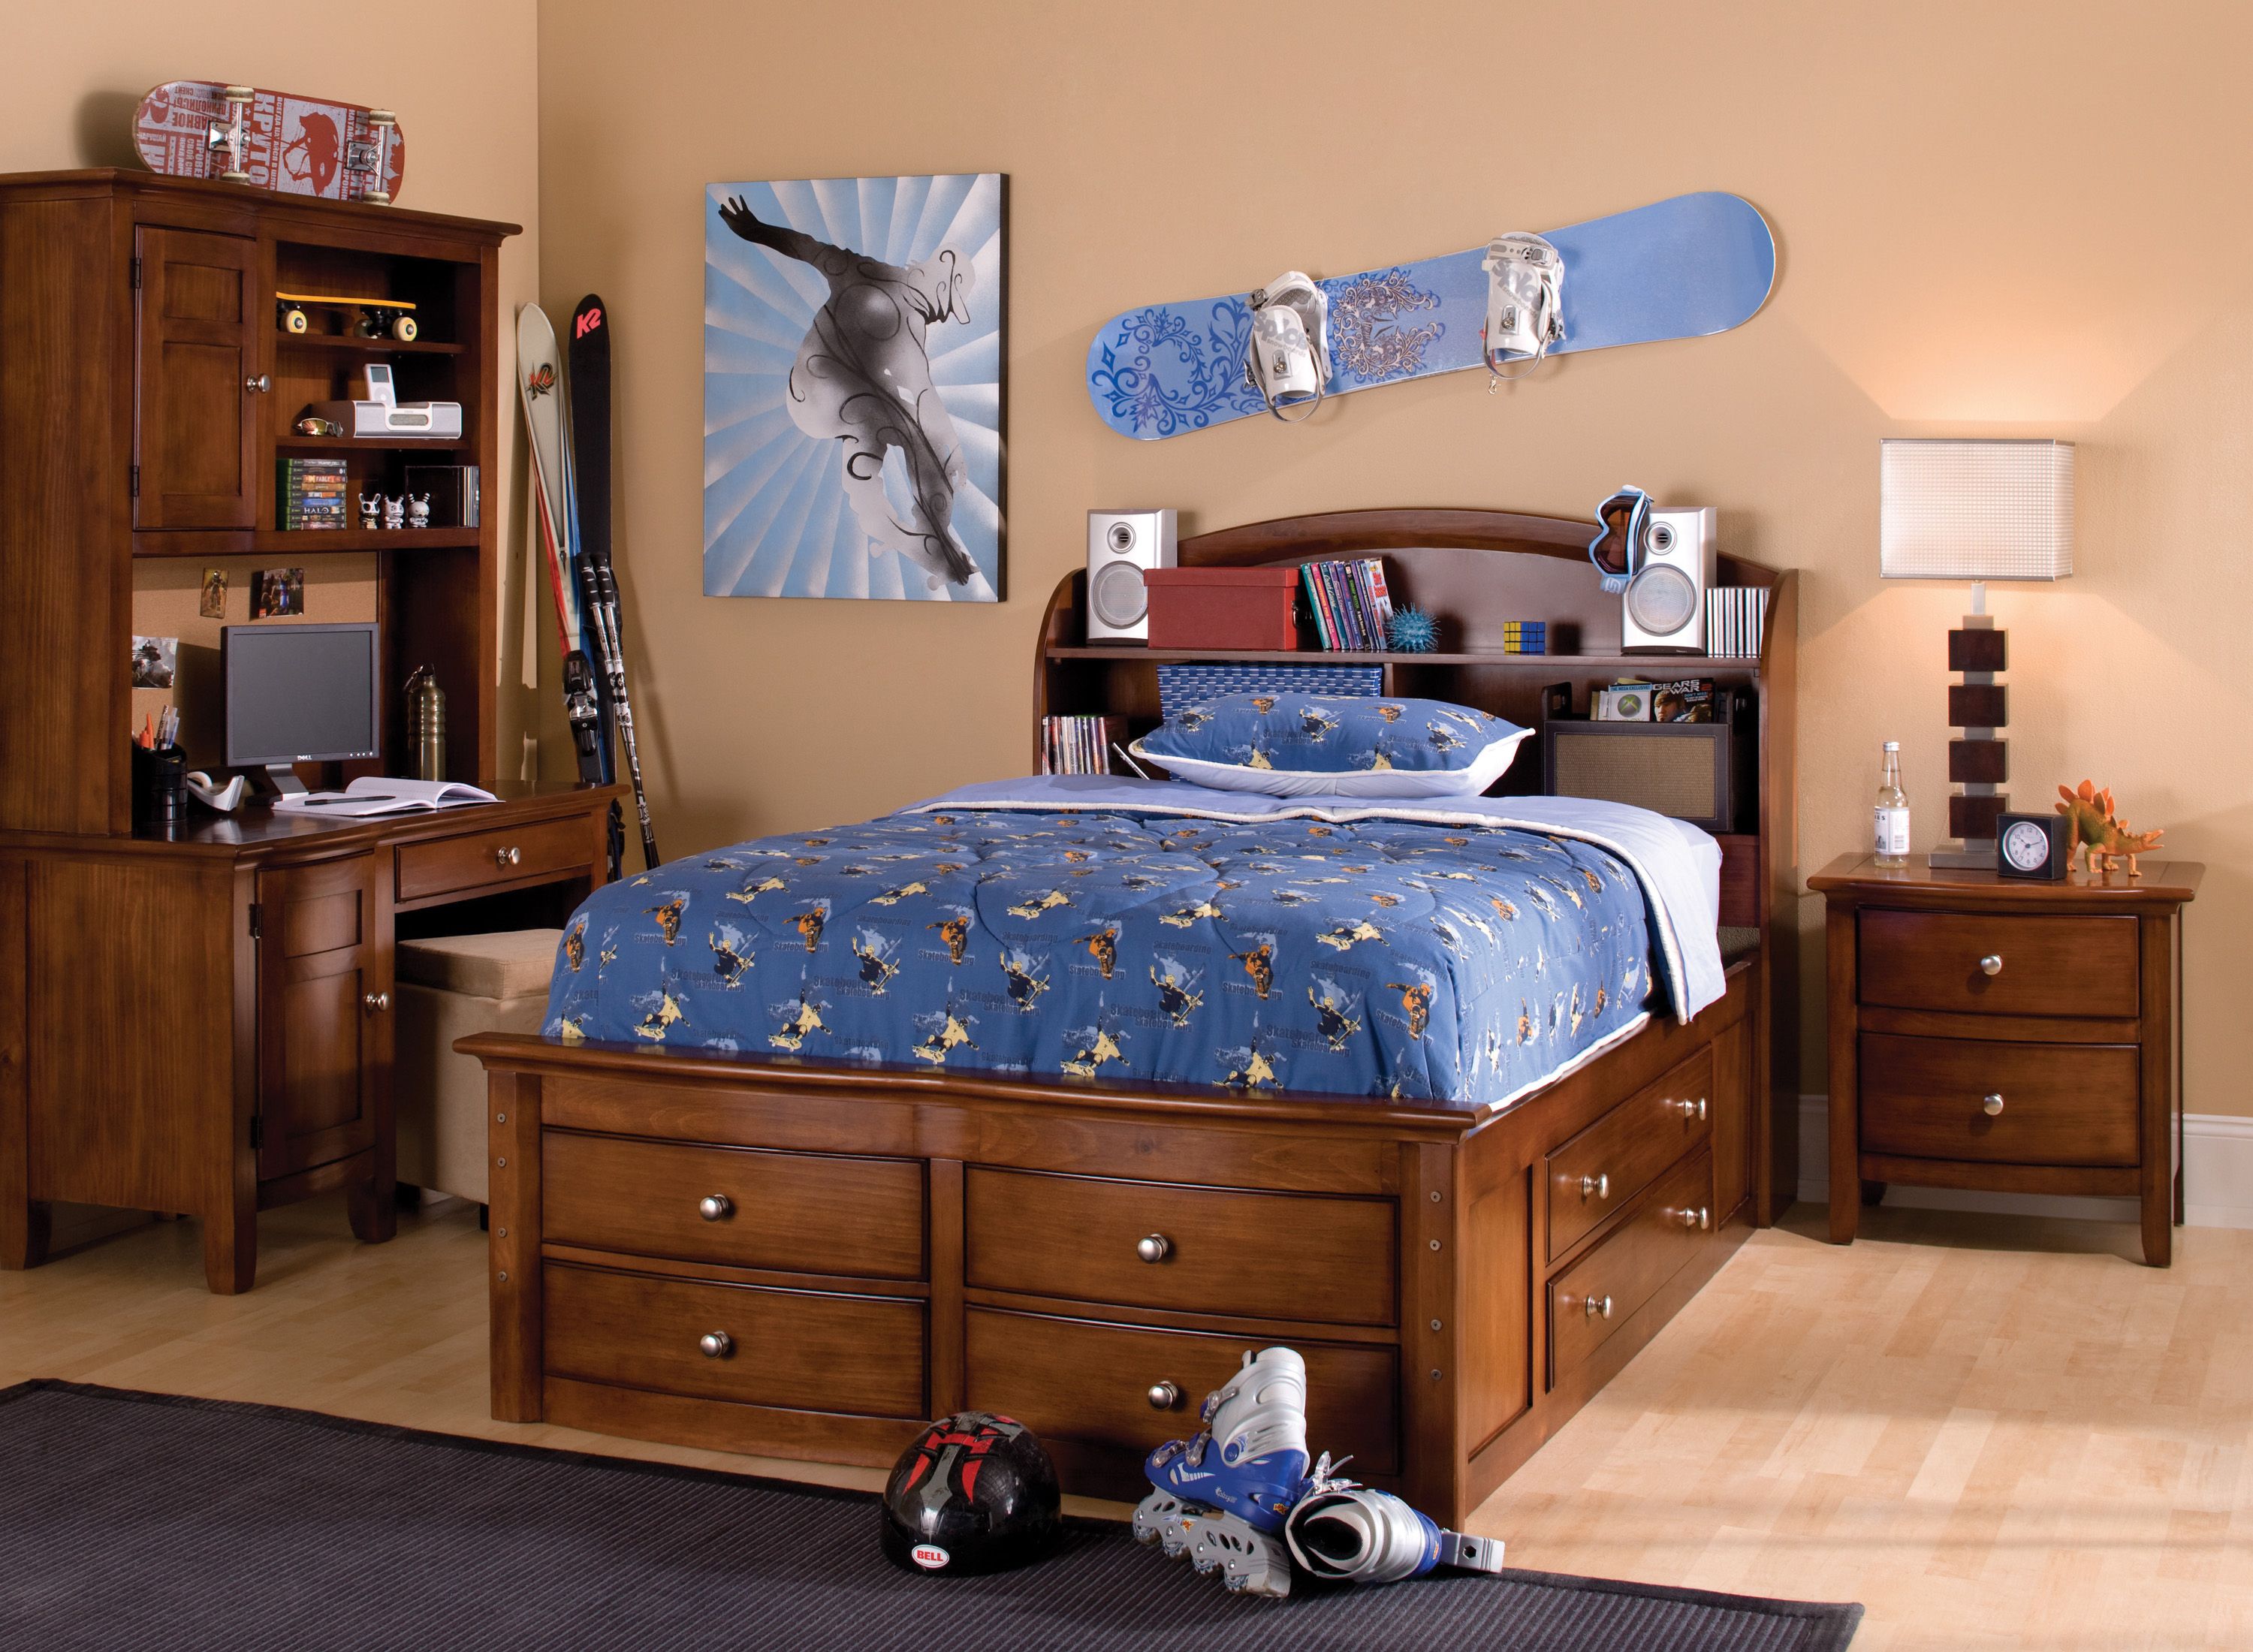 Anderson Transitional Kids Bedroom Collection | Design ...